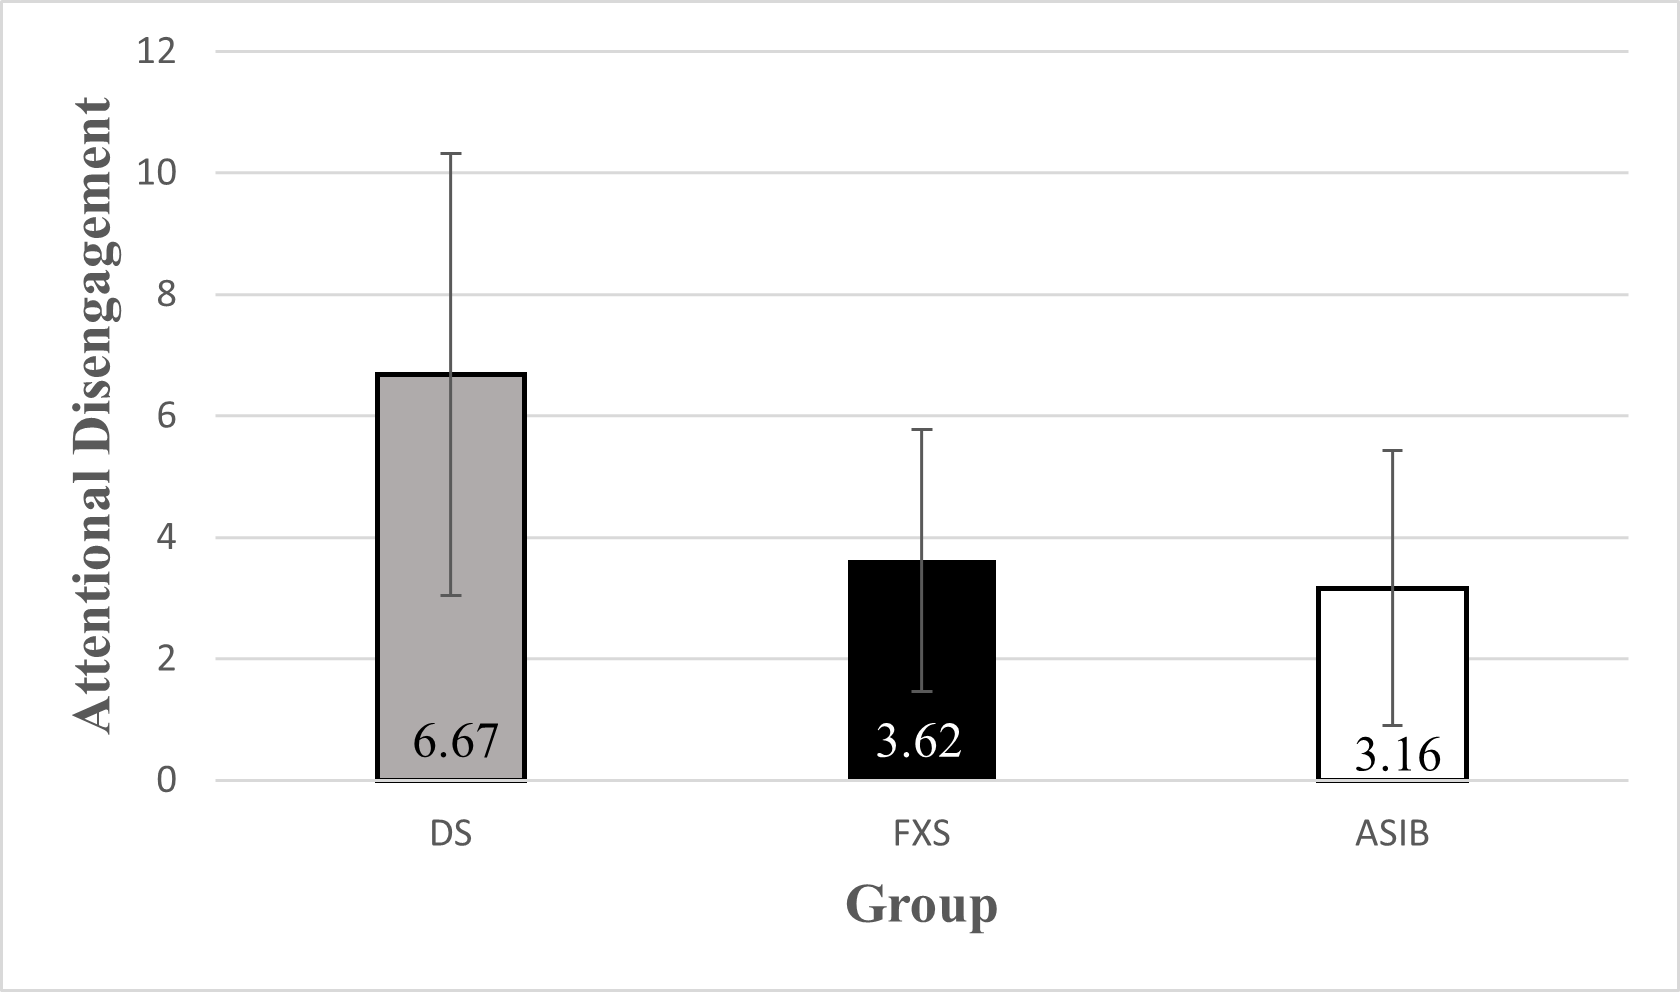 Differences in attentional disengagement between groups